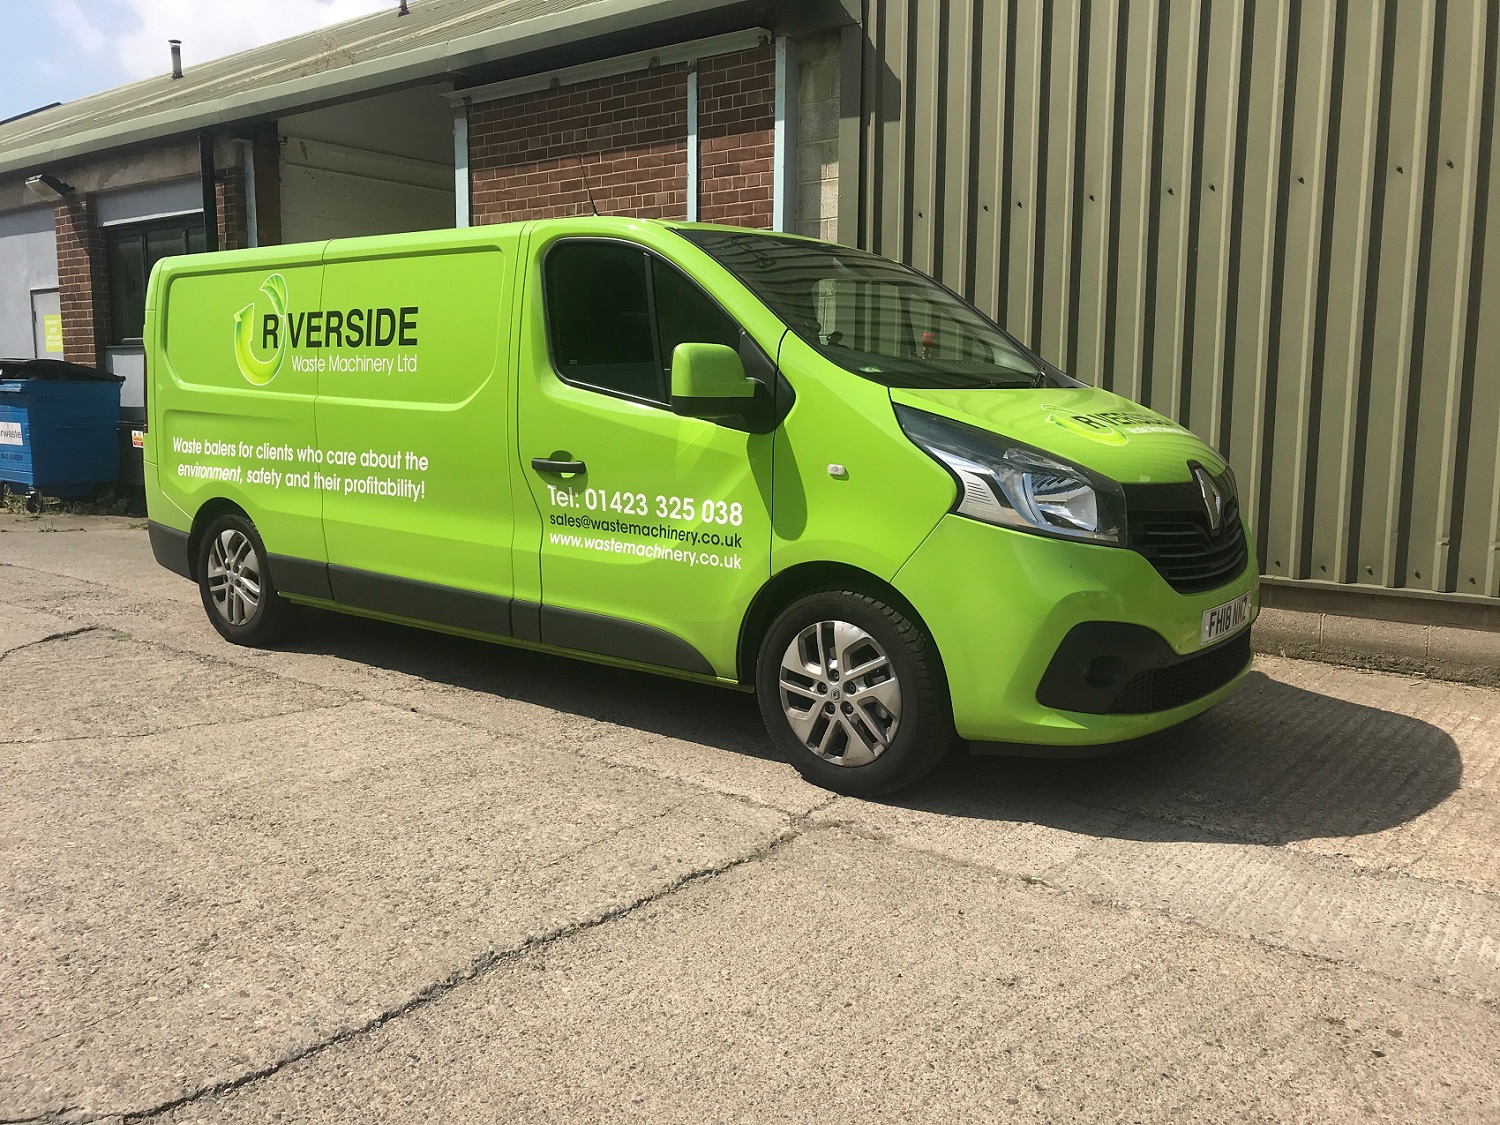 New van and signage for Riverside